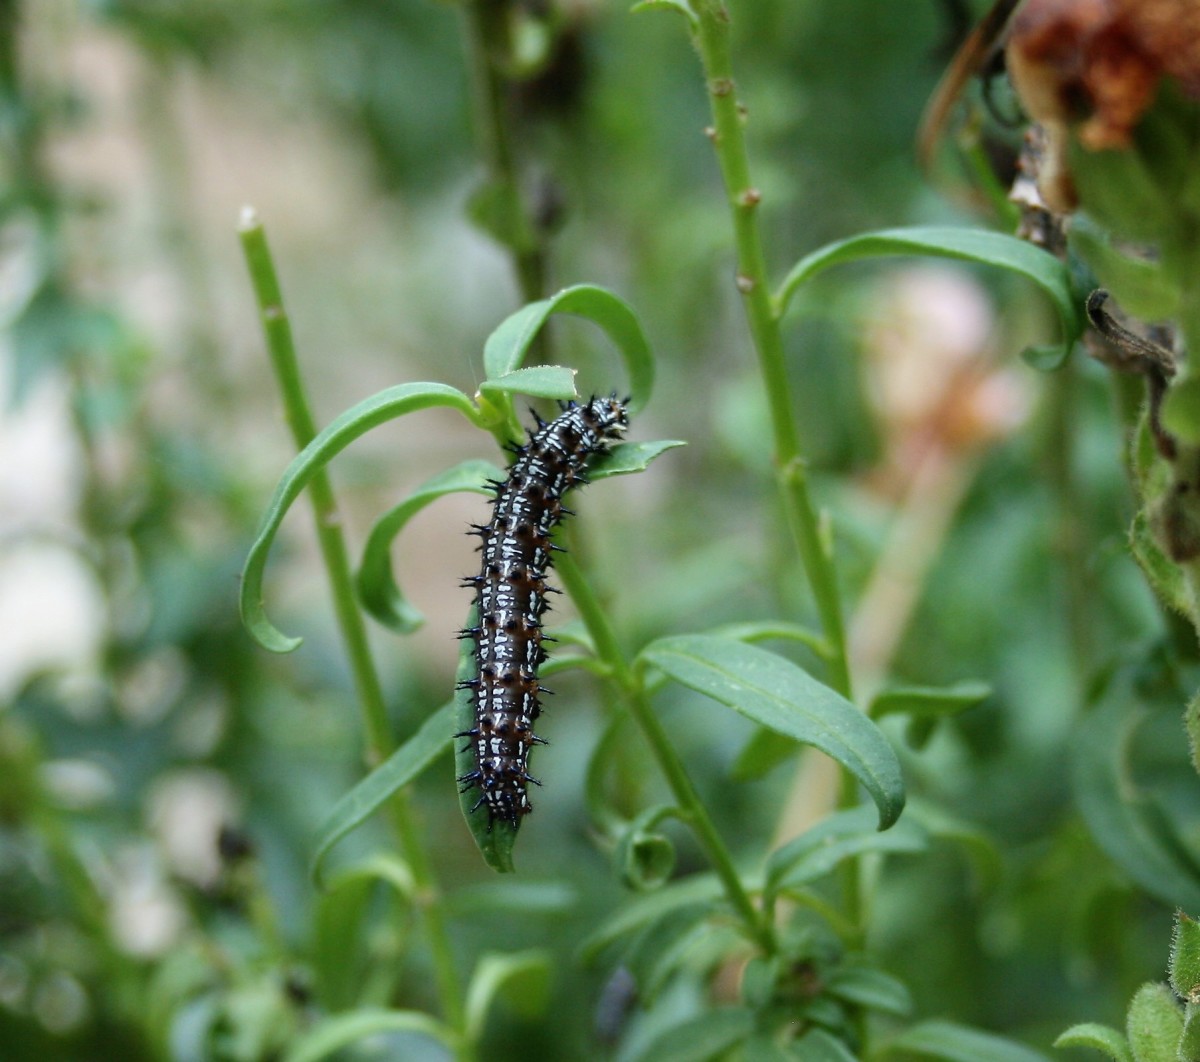 A Common Buckeye caterpillar on our snapdragons.